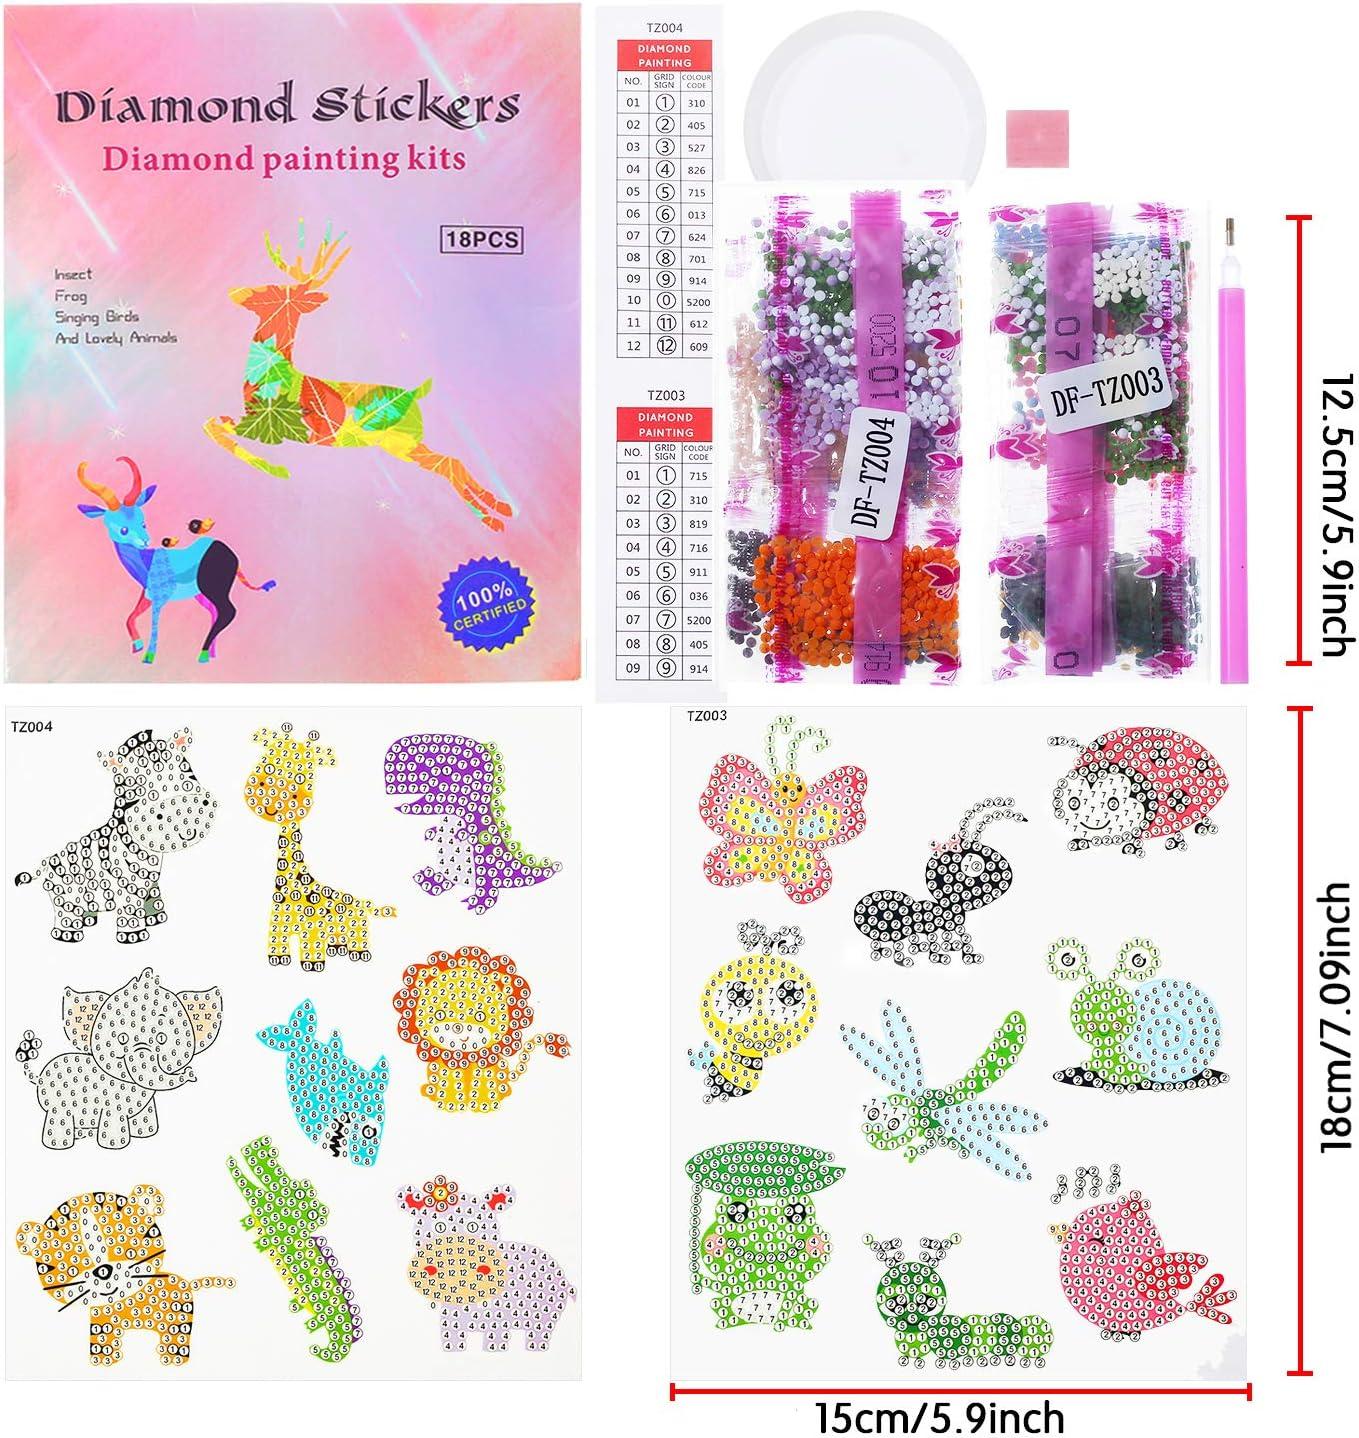 sinceroduct 64 PCS 5D DIY Diamond Painting Stickers Kits for Kids